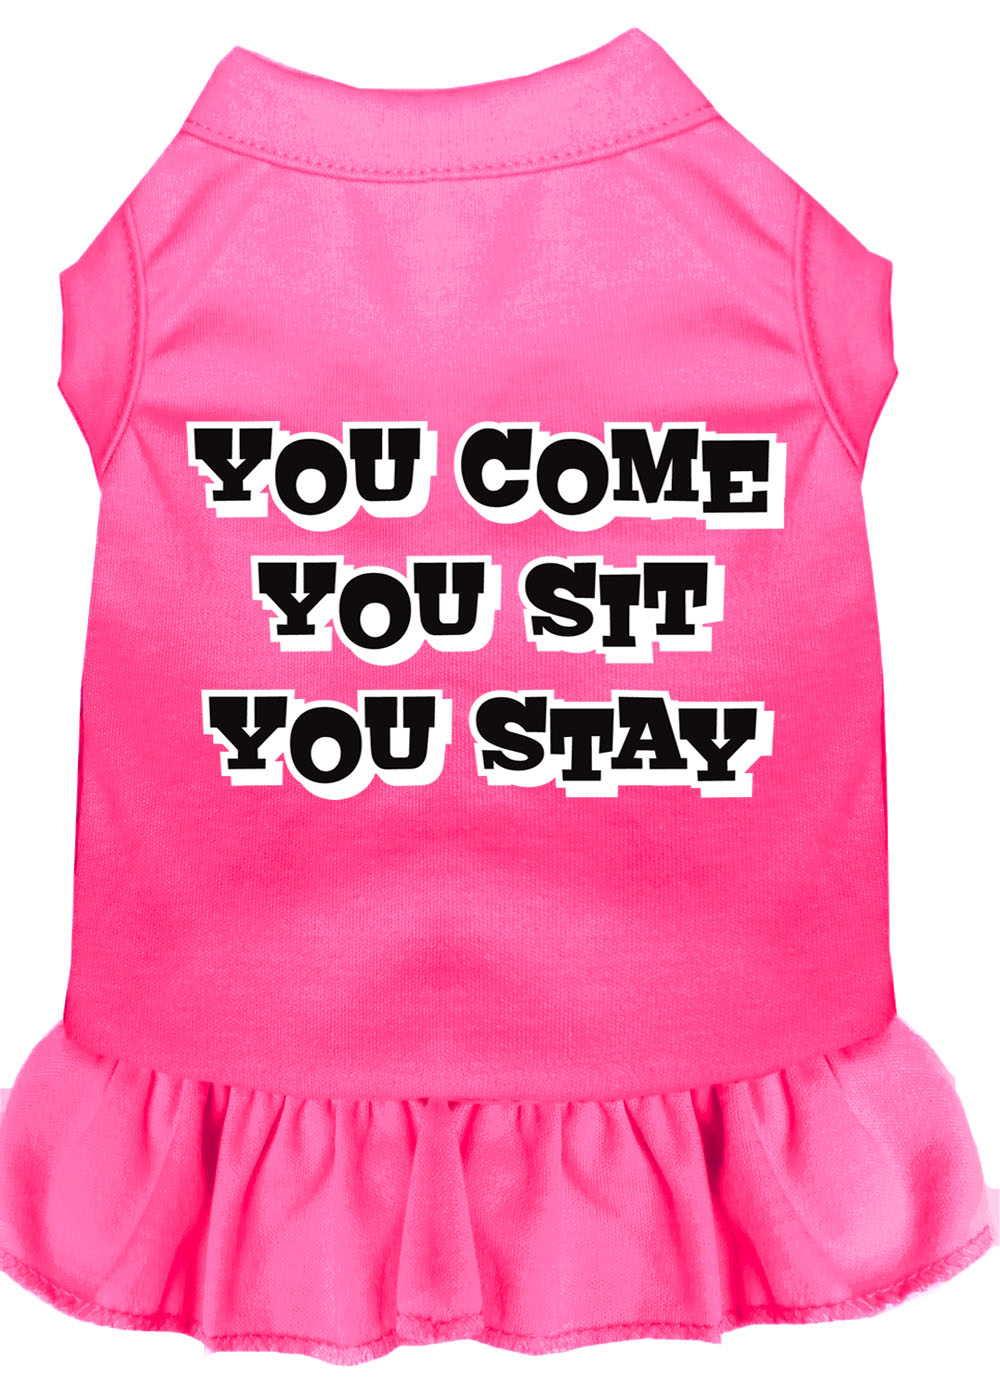 You Come, You Sit, You Stay Screen Print Dress Bright Pink Xxl GreatEagleInc